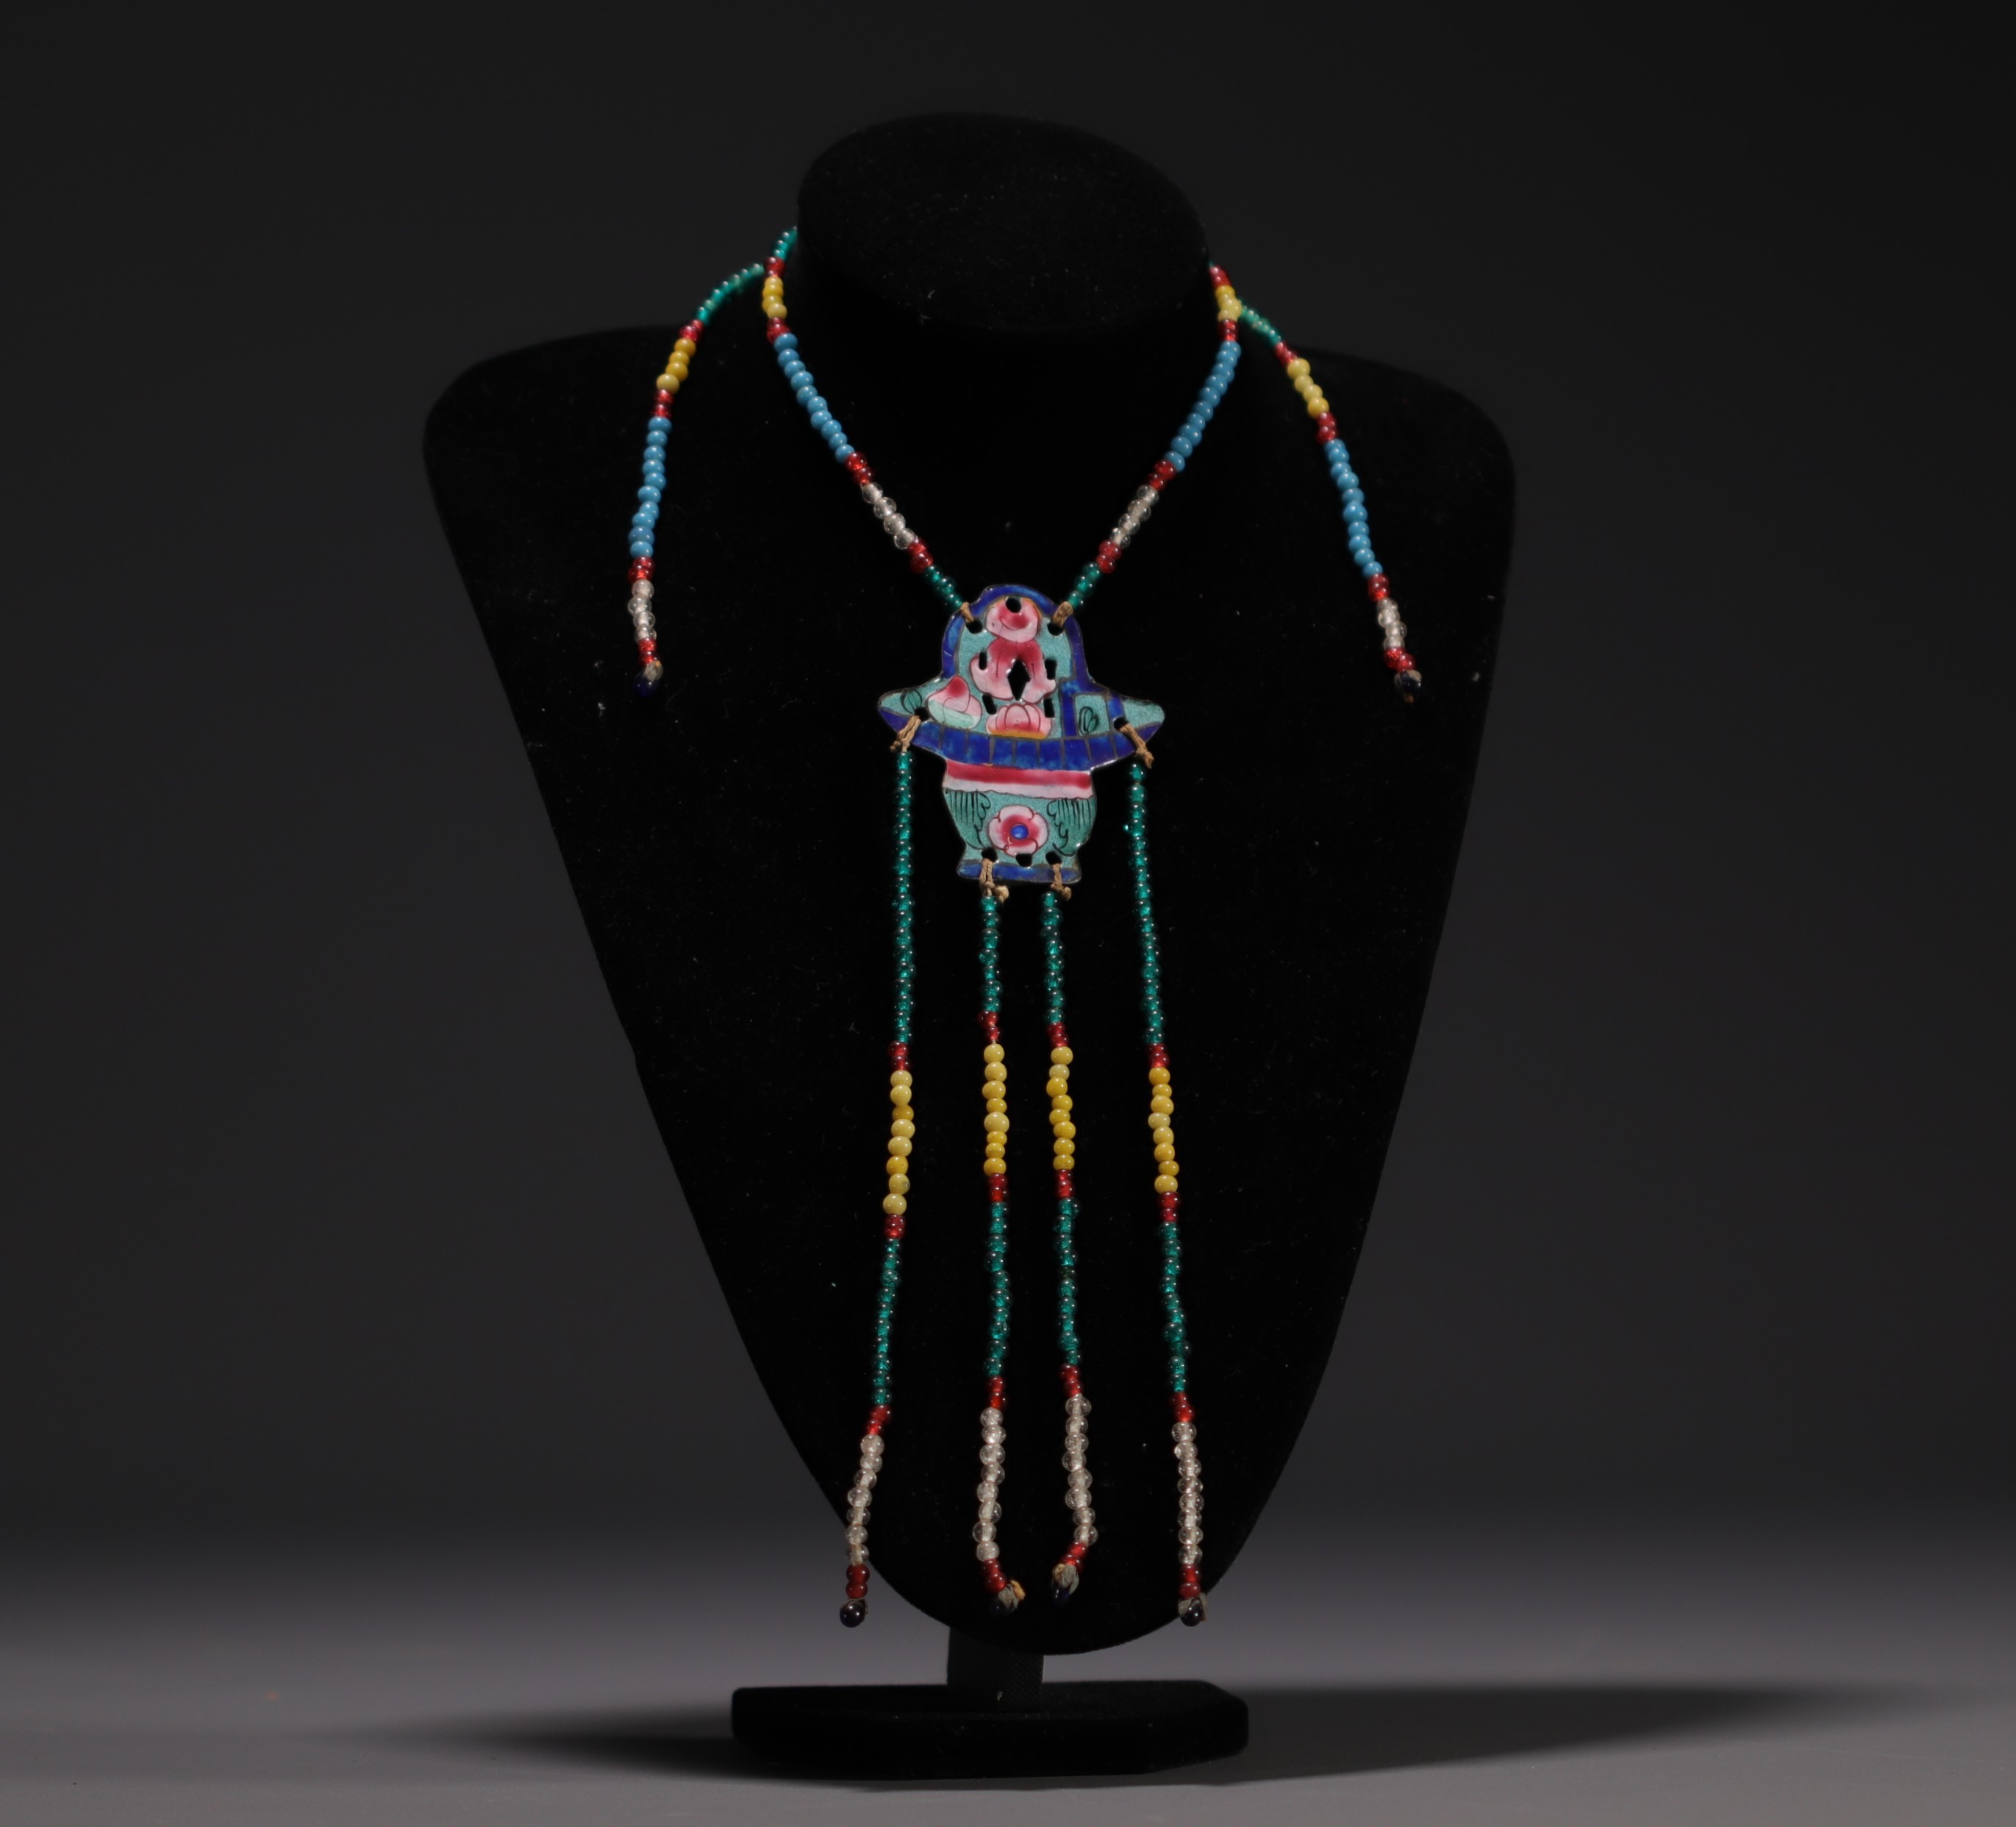 China - Set of necklaces in cloisonne enamel and pearls. - Image 2 of 5